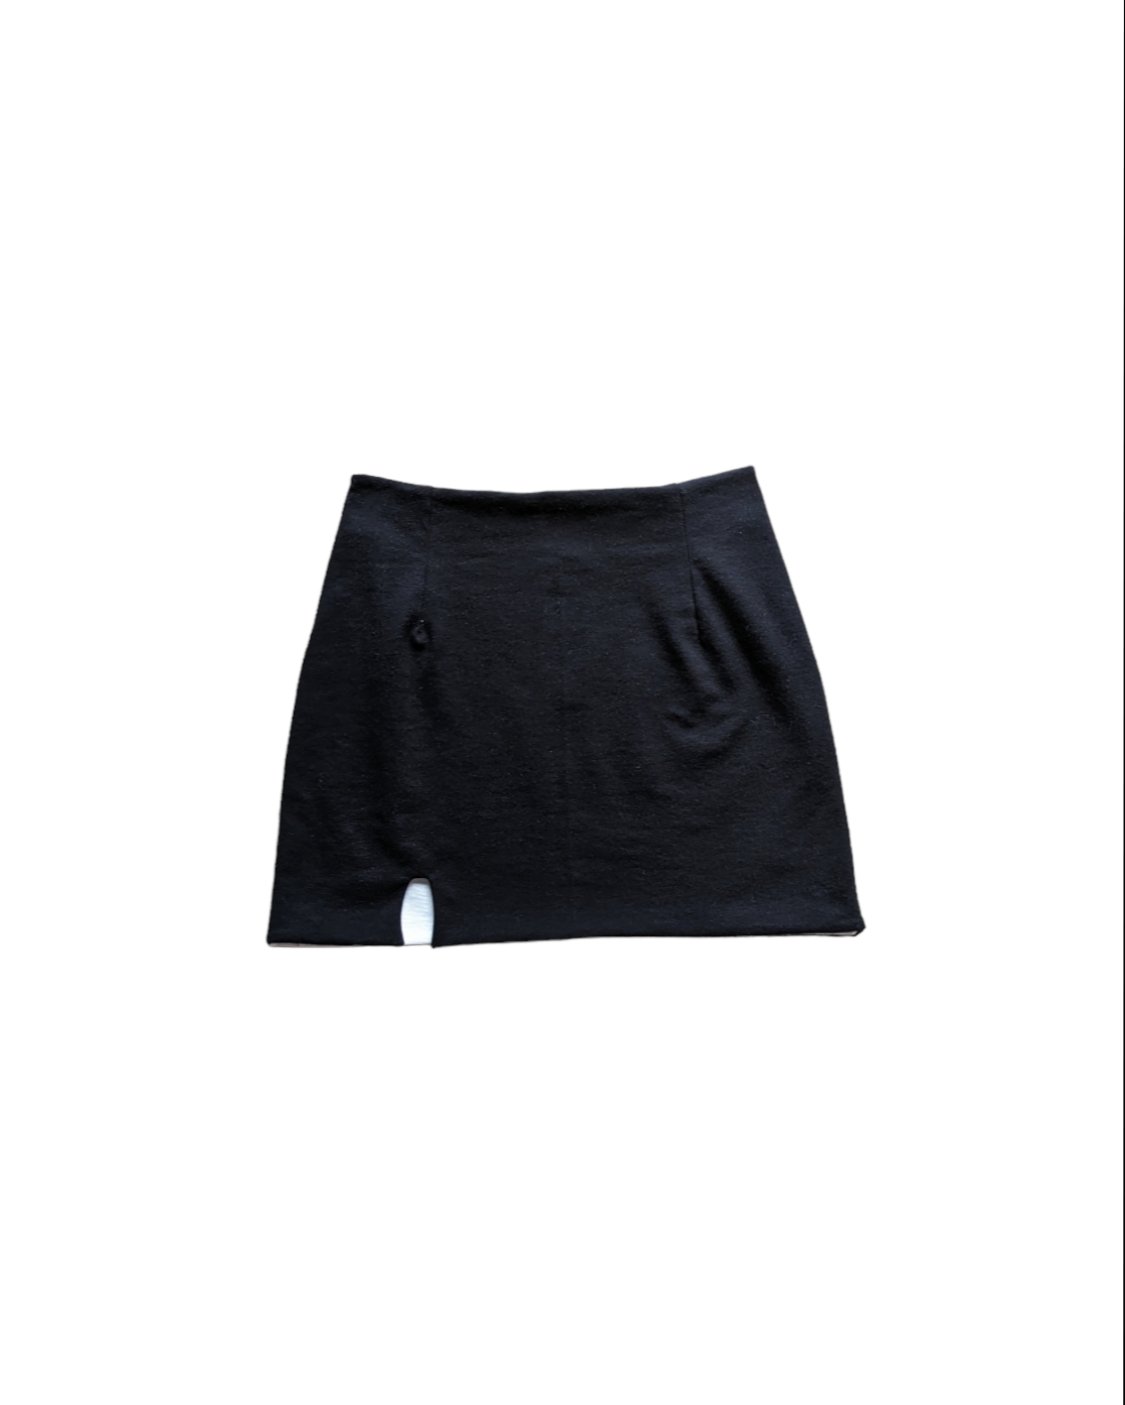 Image of CATCALL: THE REVERSIBLE MINI SKIRT in WHITE